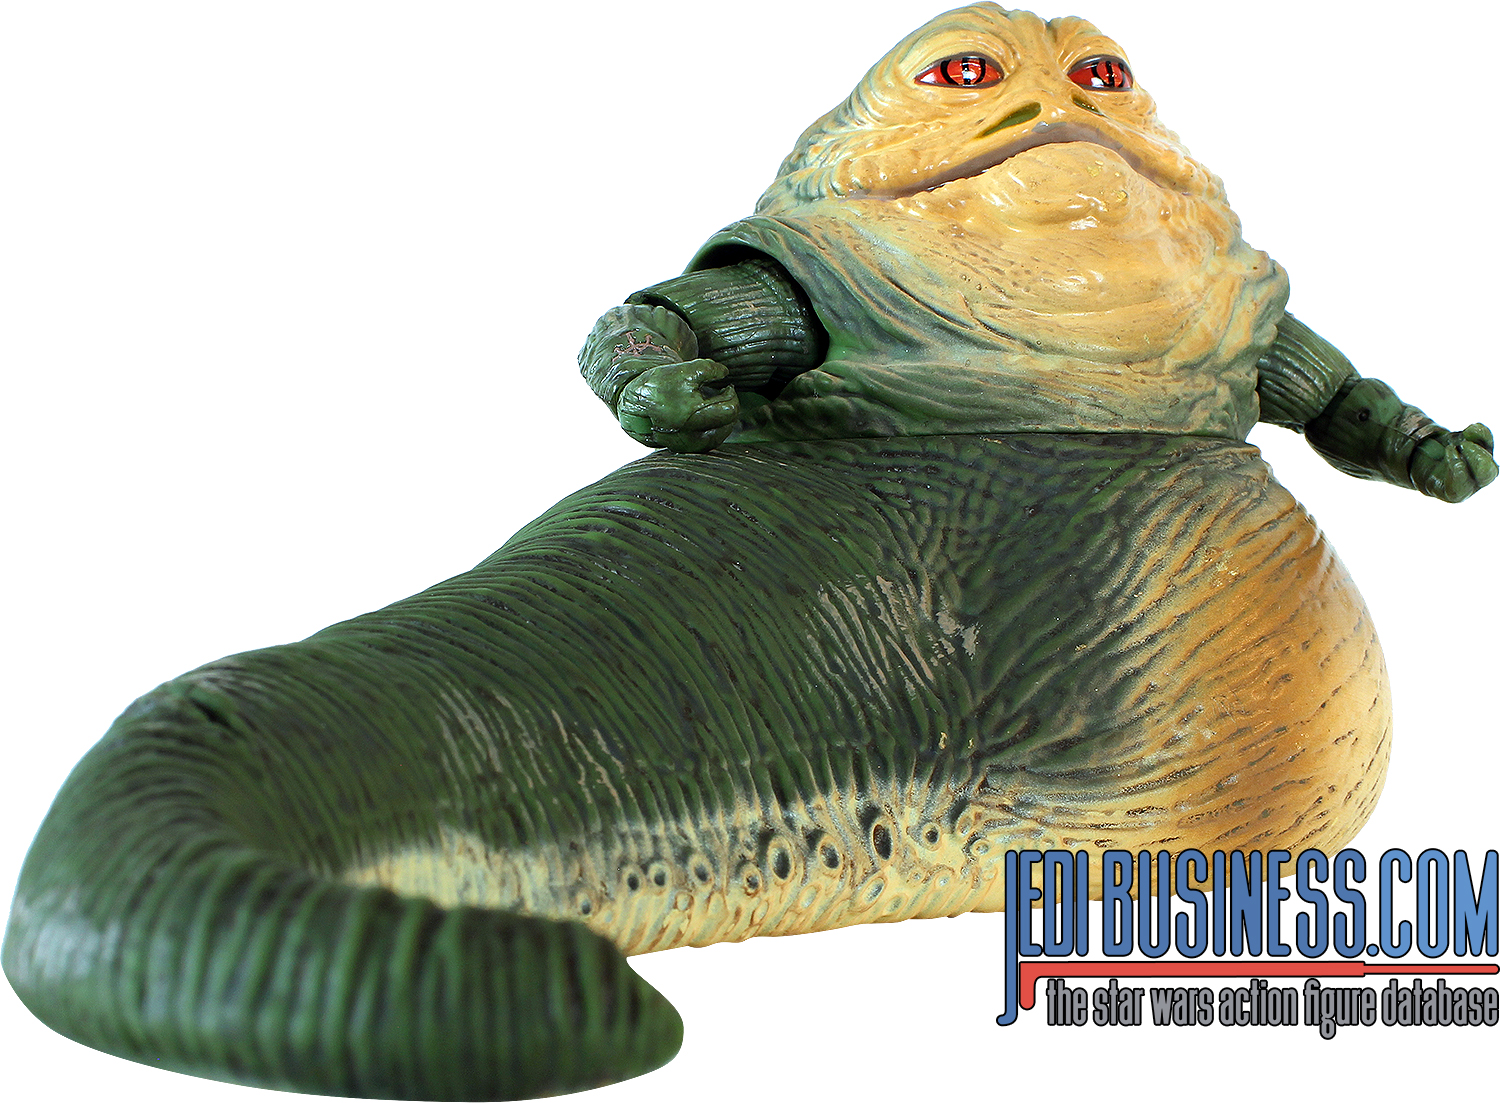 Jabba The Hutt With Sail Barge